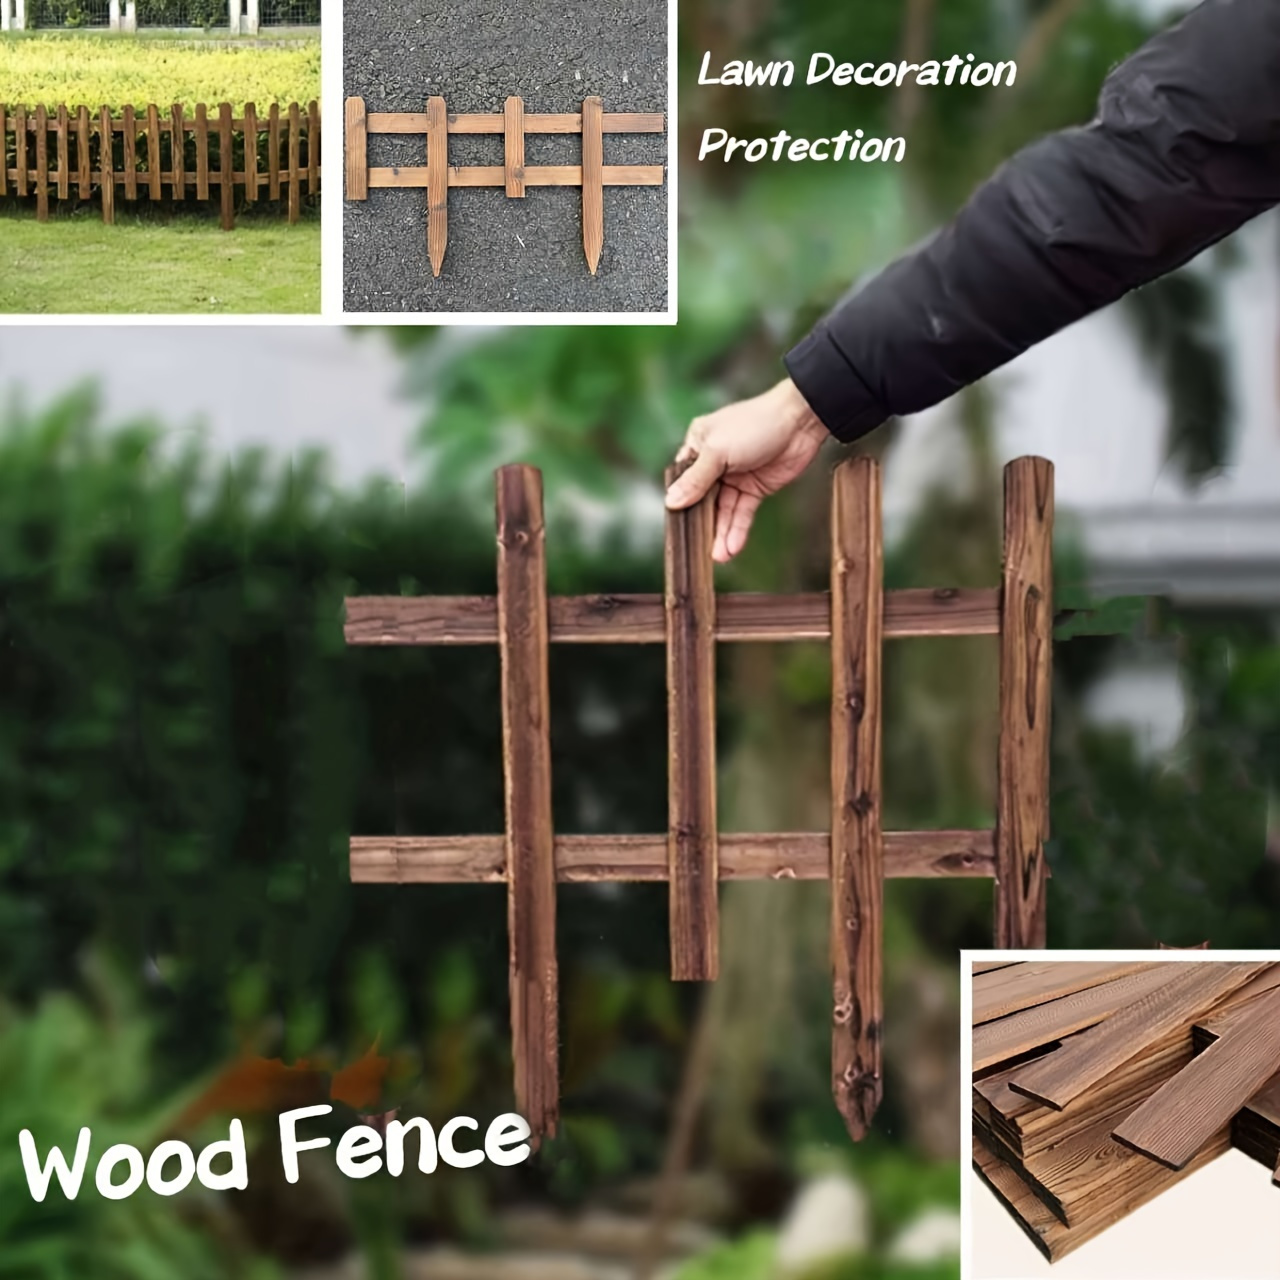 

1pc Wood Fence, Fairy Garden Vintage Picket Fence, Anti-corrosion Wooden Crafts, Diy Garden Lawn Landscape Ornament, Home Outdoor Decor, Outdoor Courtyard Park Lawn Decoration